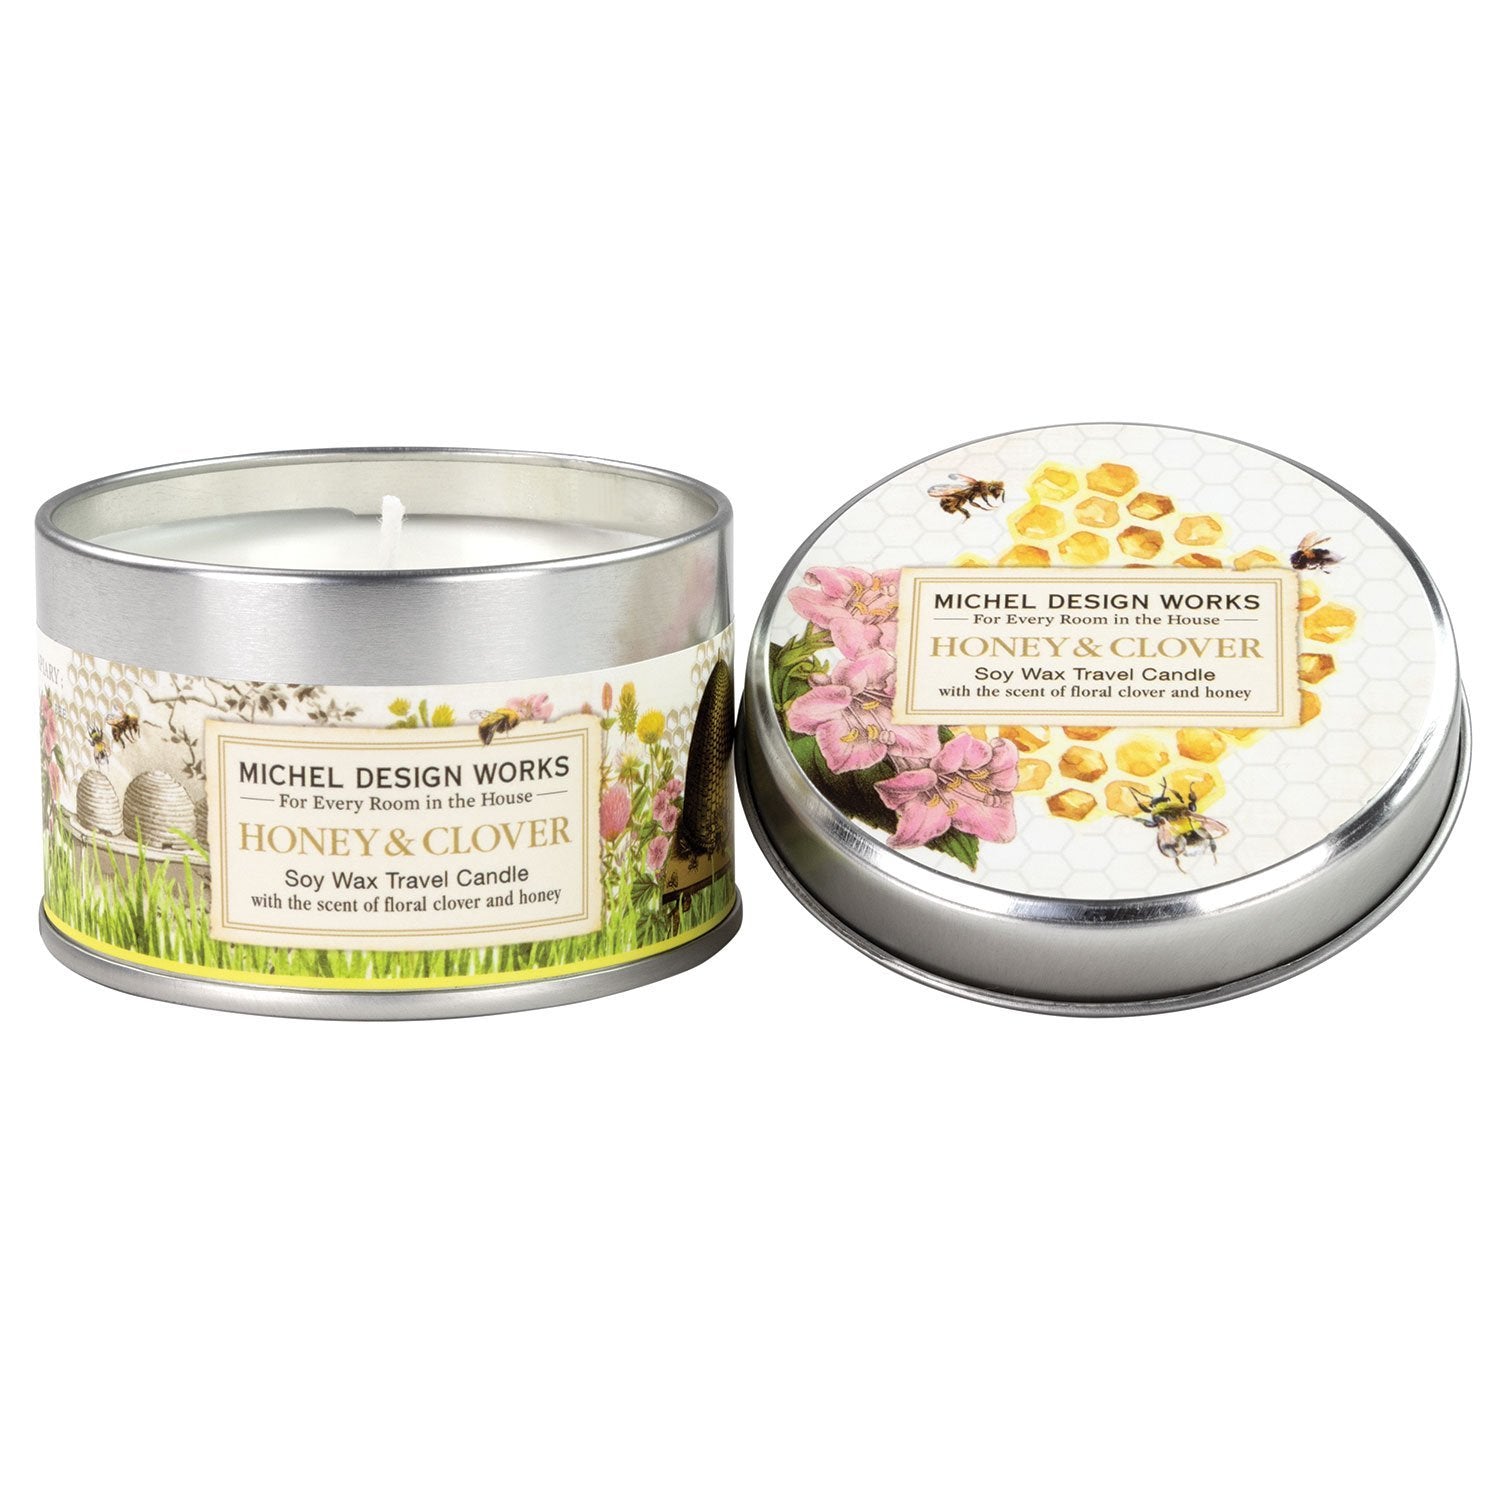 Honey & Clover Travel Soy Candle